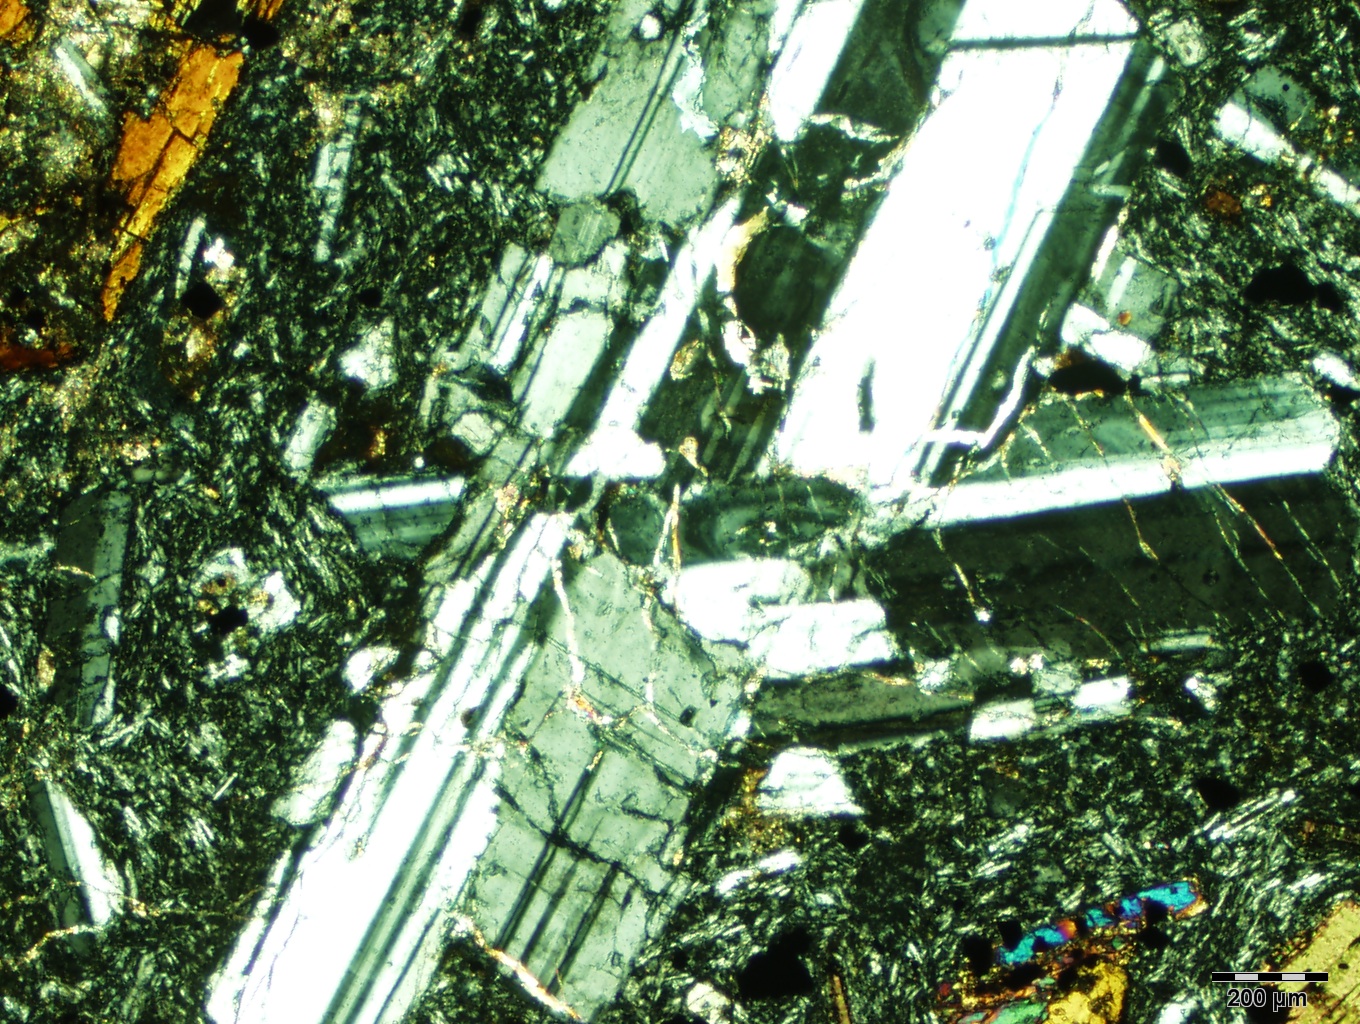 Plagioclase Mineral under the microscope